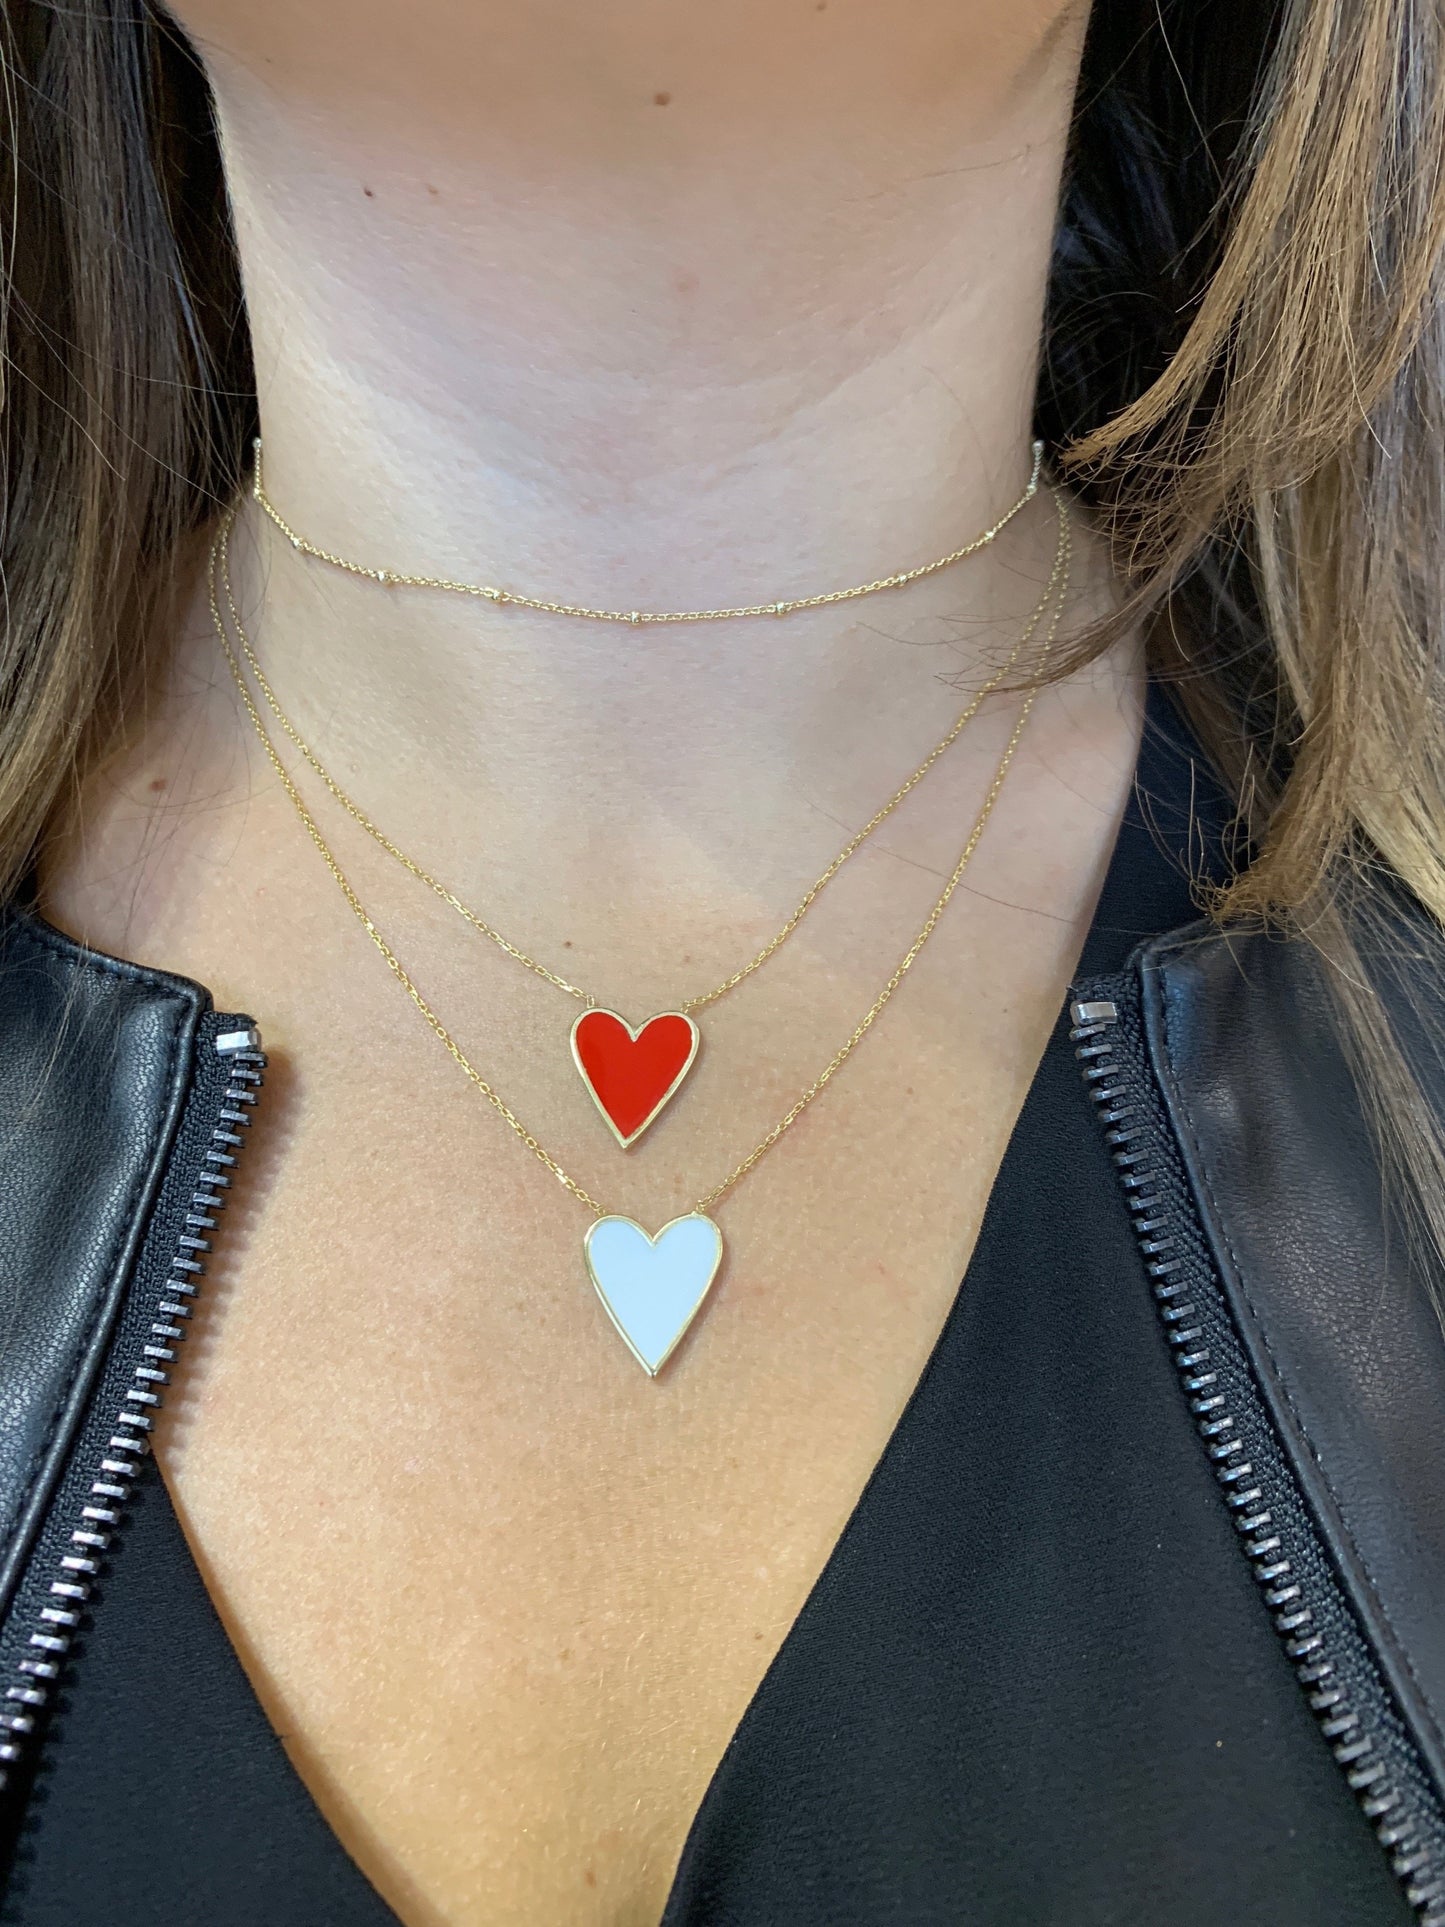 Enamel Heart Necklace - Retail Therapy Jewelry